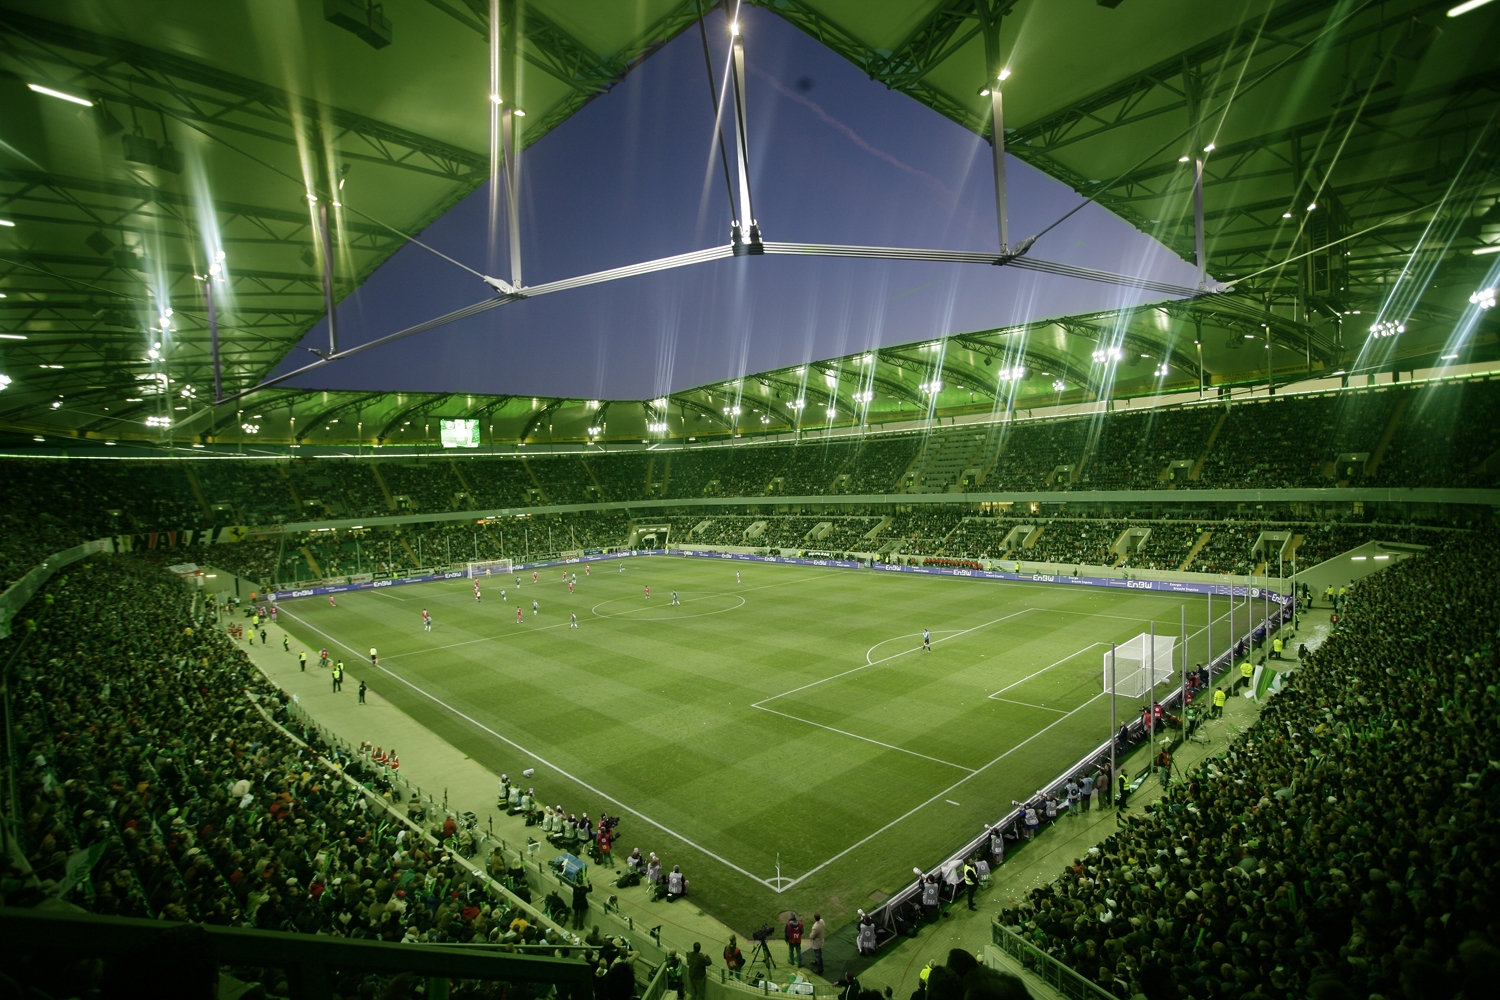 Wolfsburg VS Hannover ( BETTING TIPS, Match Preview & Expert Analysis )